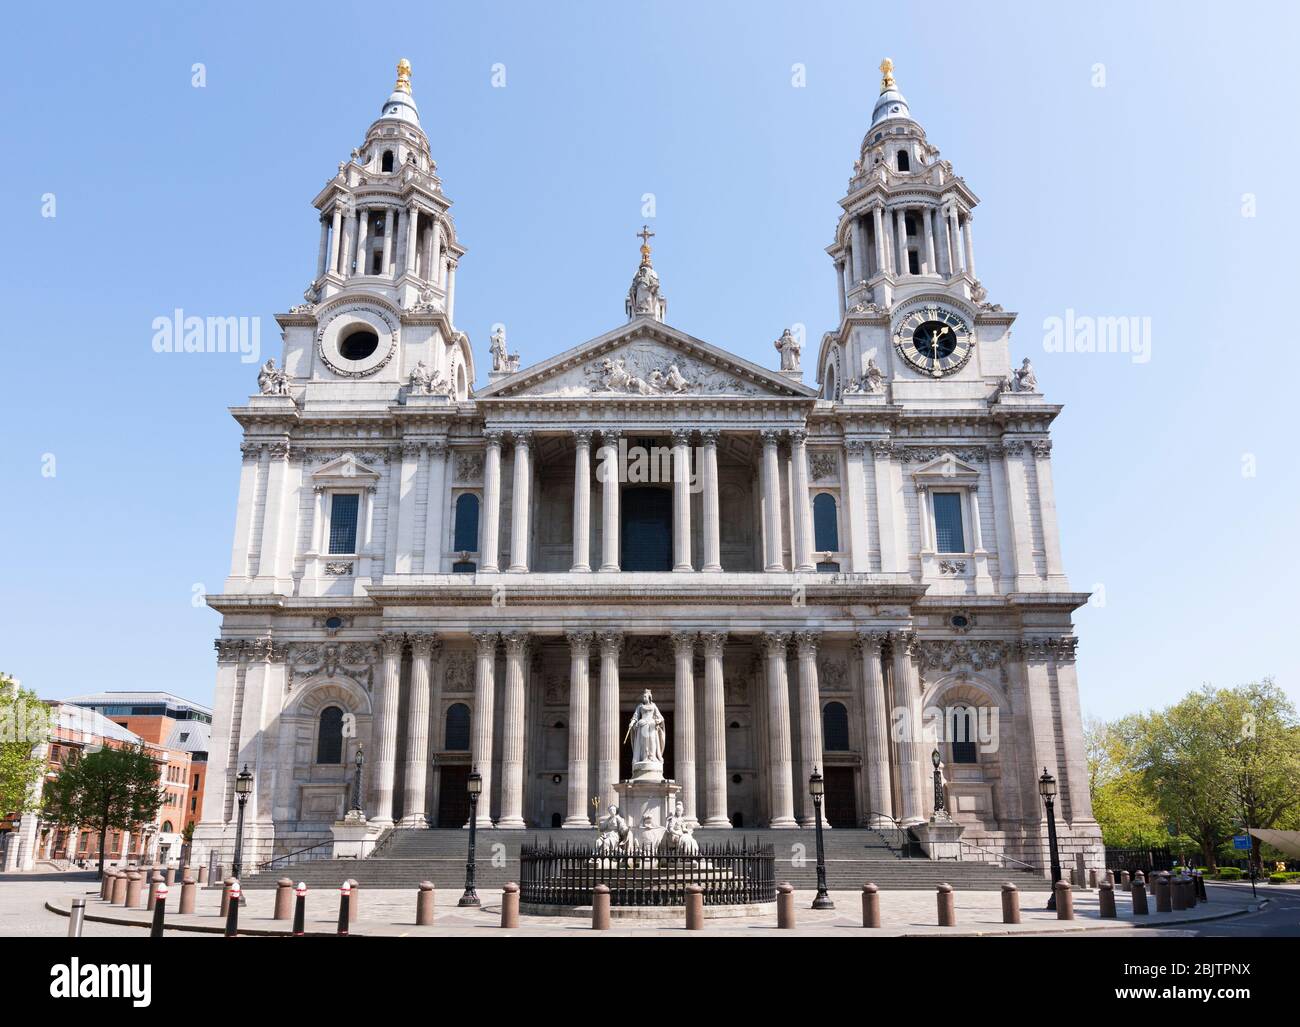 Exterior front showpiece facade exterior / outside of Saint Pauls Cathedral, London EC4, UK. The west face is shown during the afternoon, without people. (118) Stock Photo